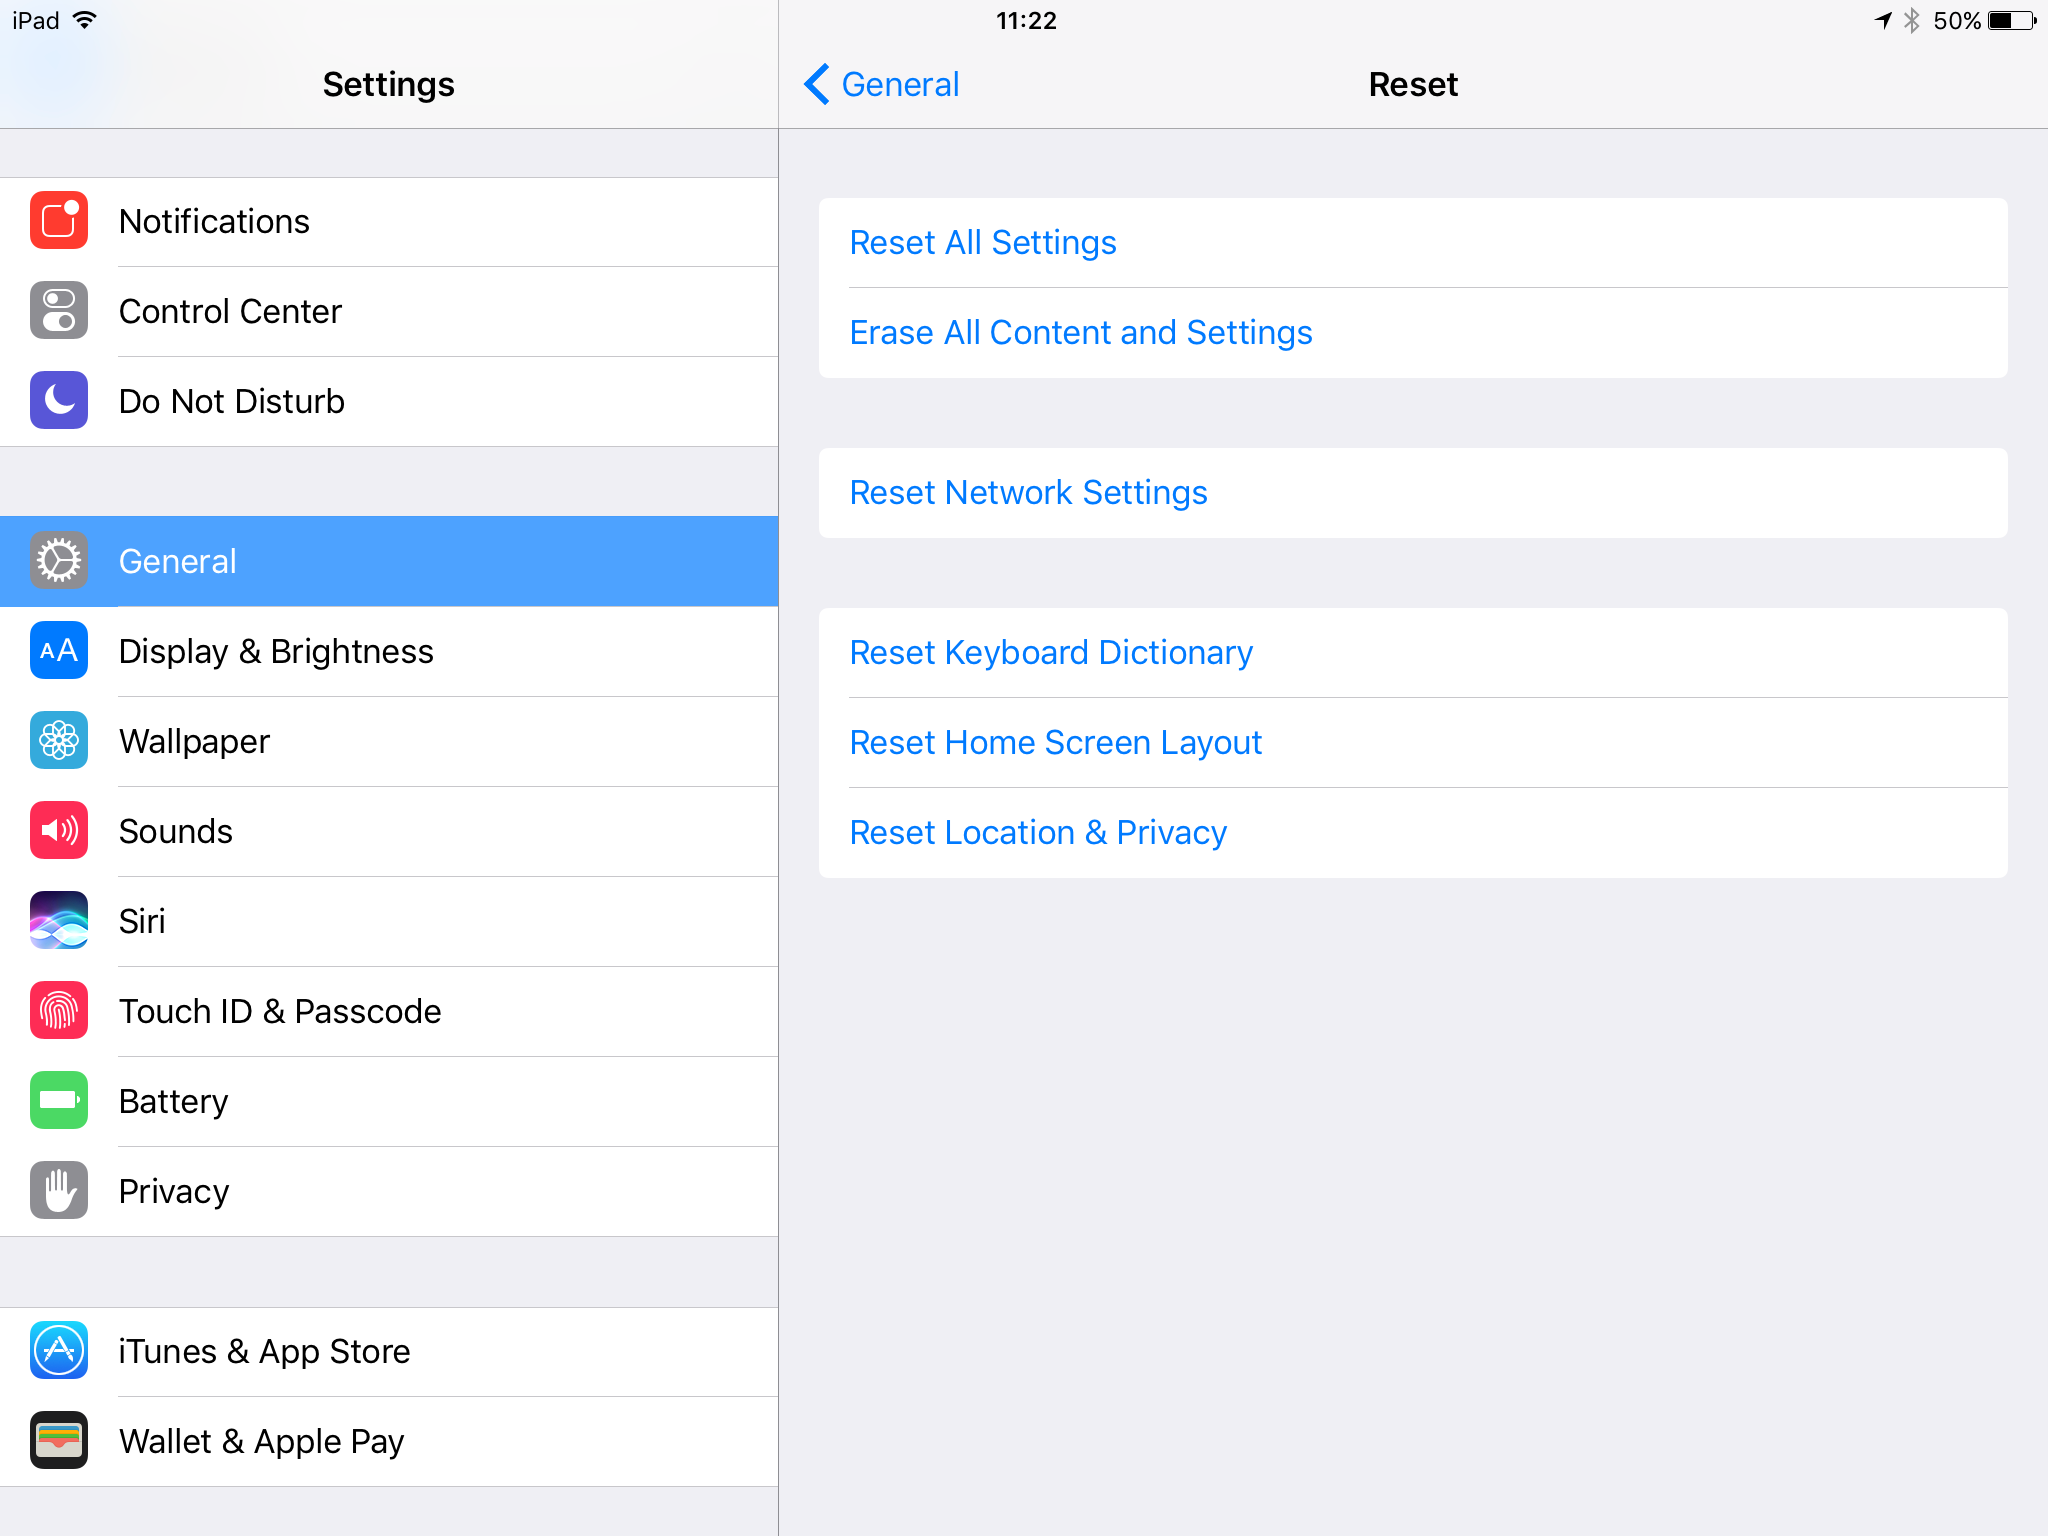 How to Reset Your iPad Easily and Simple